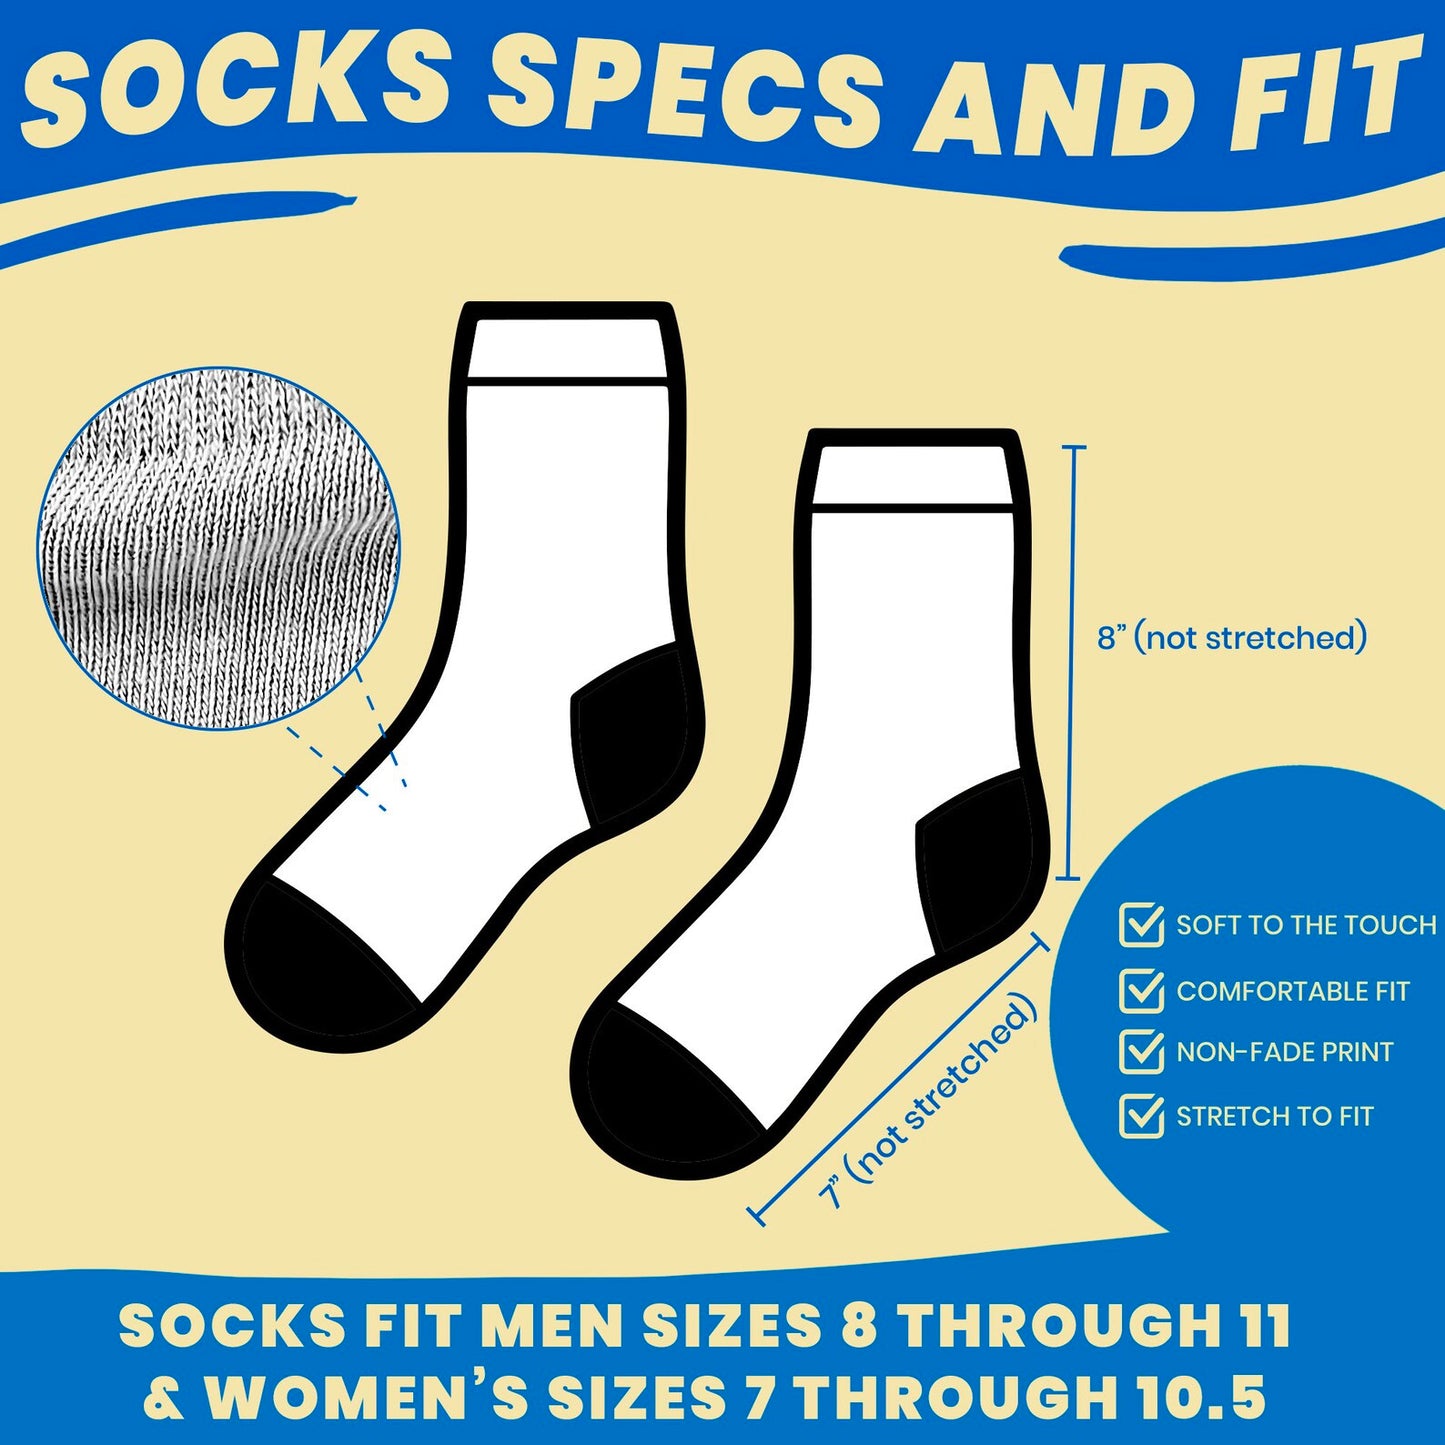 admin assistant gifts personalized socks with faces socks specs and fit. Socks fit men sizes up to 13, most women sizes and all kids sizes